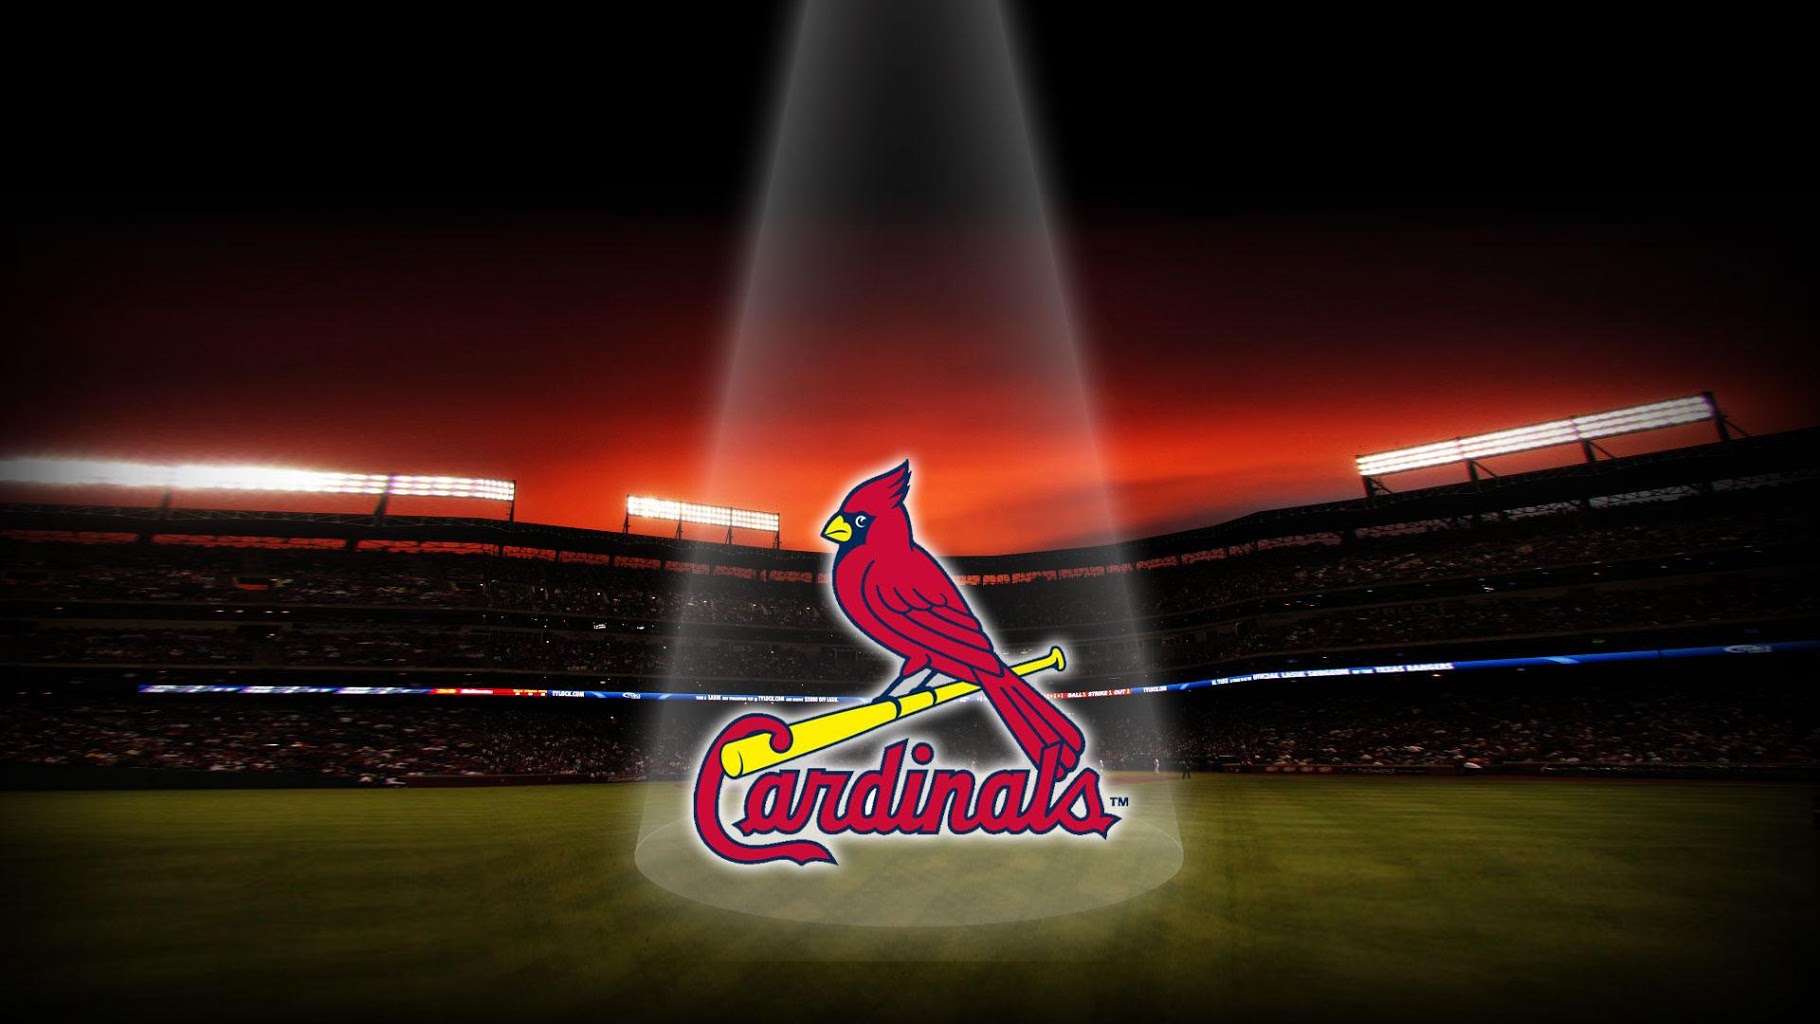 Awesome St Louis Cardinals Wallpapers | World's Greatest Art Site